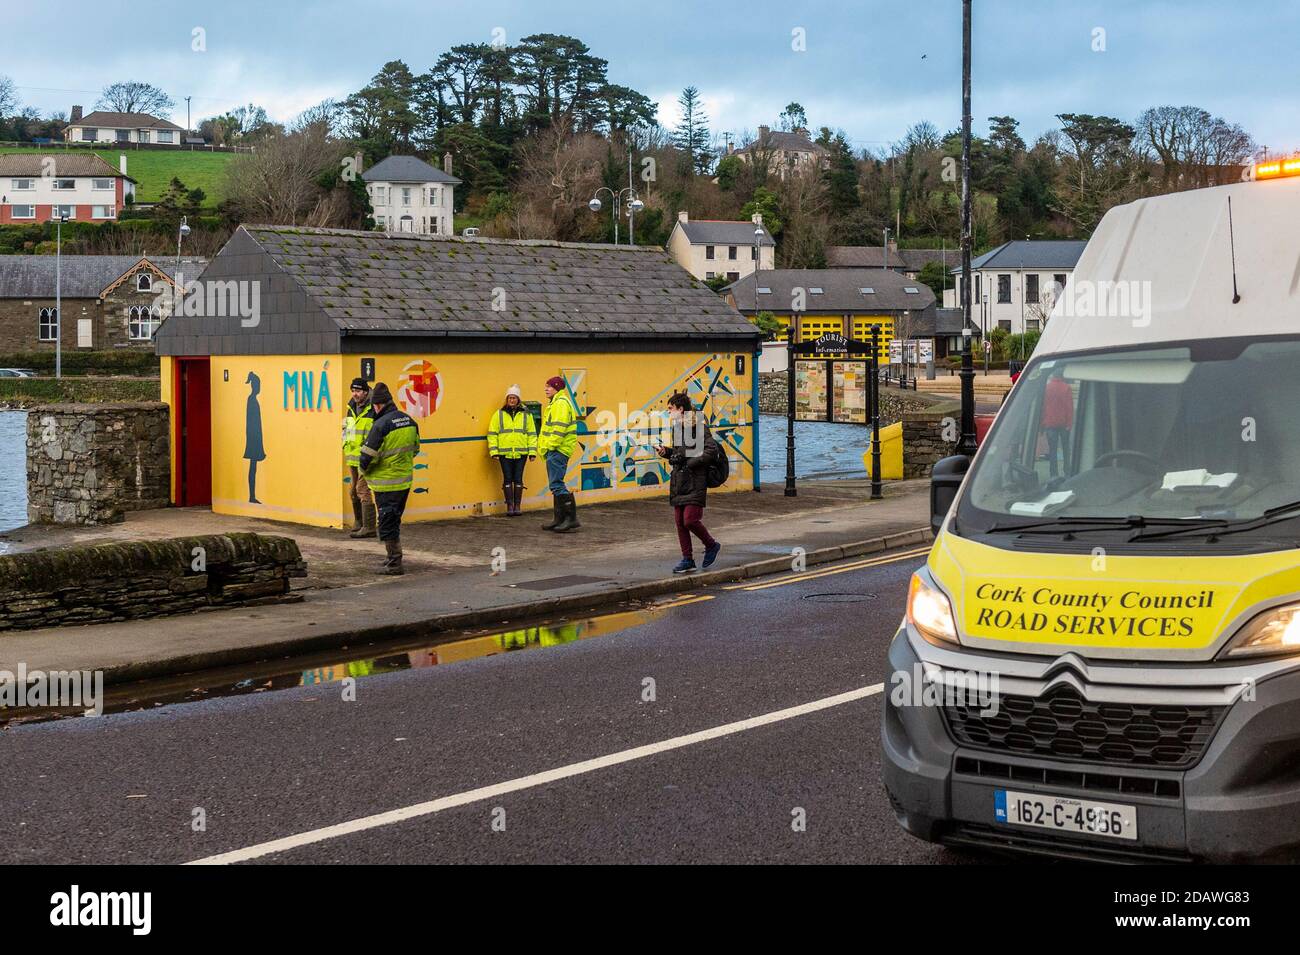 Bantry, West Cork, Ireland. 15th Nov, 2020. After part of the town square flooded this morning, high tide passed this evening with no floods. Cork County Council employees, including Council engineer Ruth O'Brien, were on stand-by in case the square flooded again. Credit: AG News/Alamy Live News Stock Photo